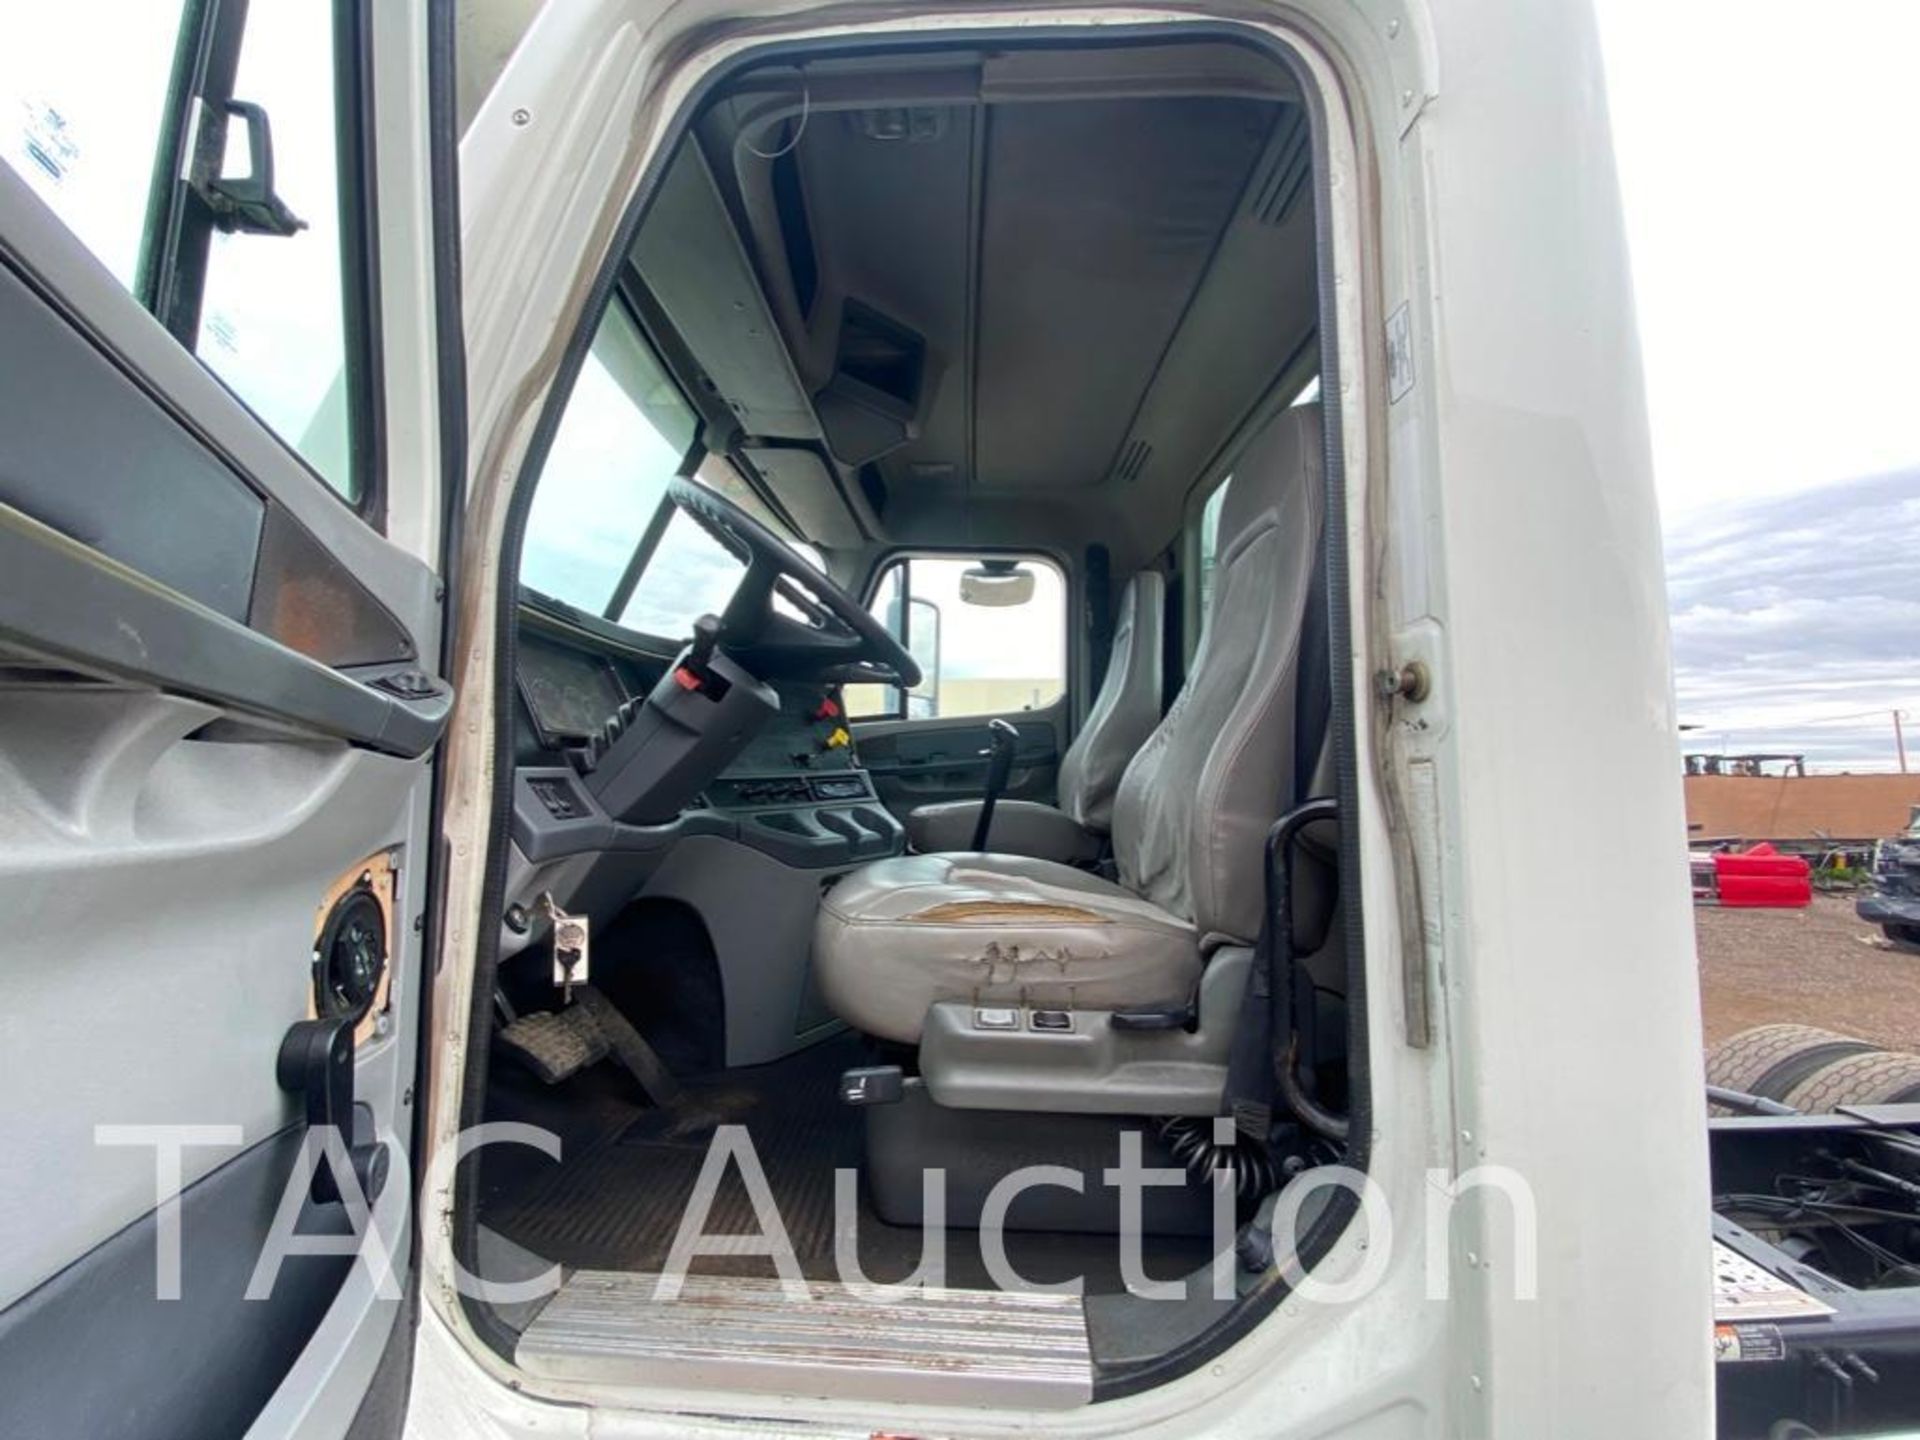 2005 Freightliner Columbia Day Cab - Image 14 of 72